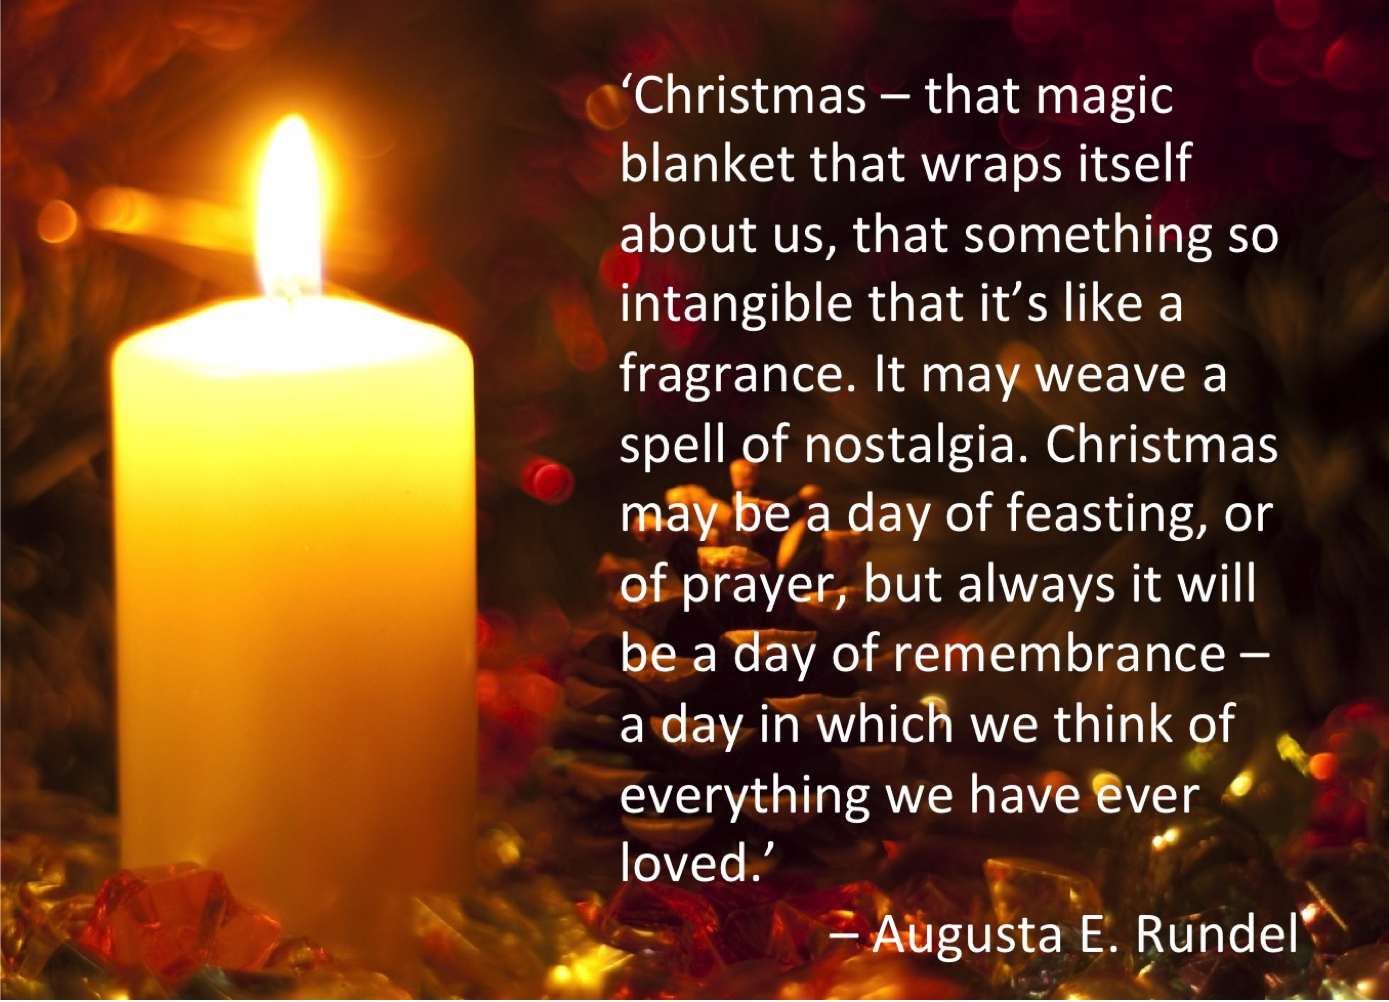 Christmas Augusta E. Rundel quote."Christmas--that magic blanket that wraps itself about us, that something so intangible that it is like a fragrance. It may weave a spell of nostalgia. Christmas may be a day of feasting, or of prayer, but always it will be a day of remembrance--a day in which we think of everything we have ever loved." -Augusta E. Rundel